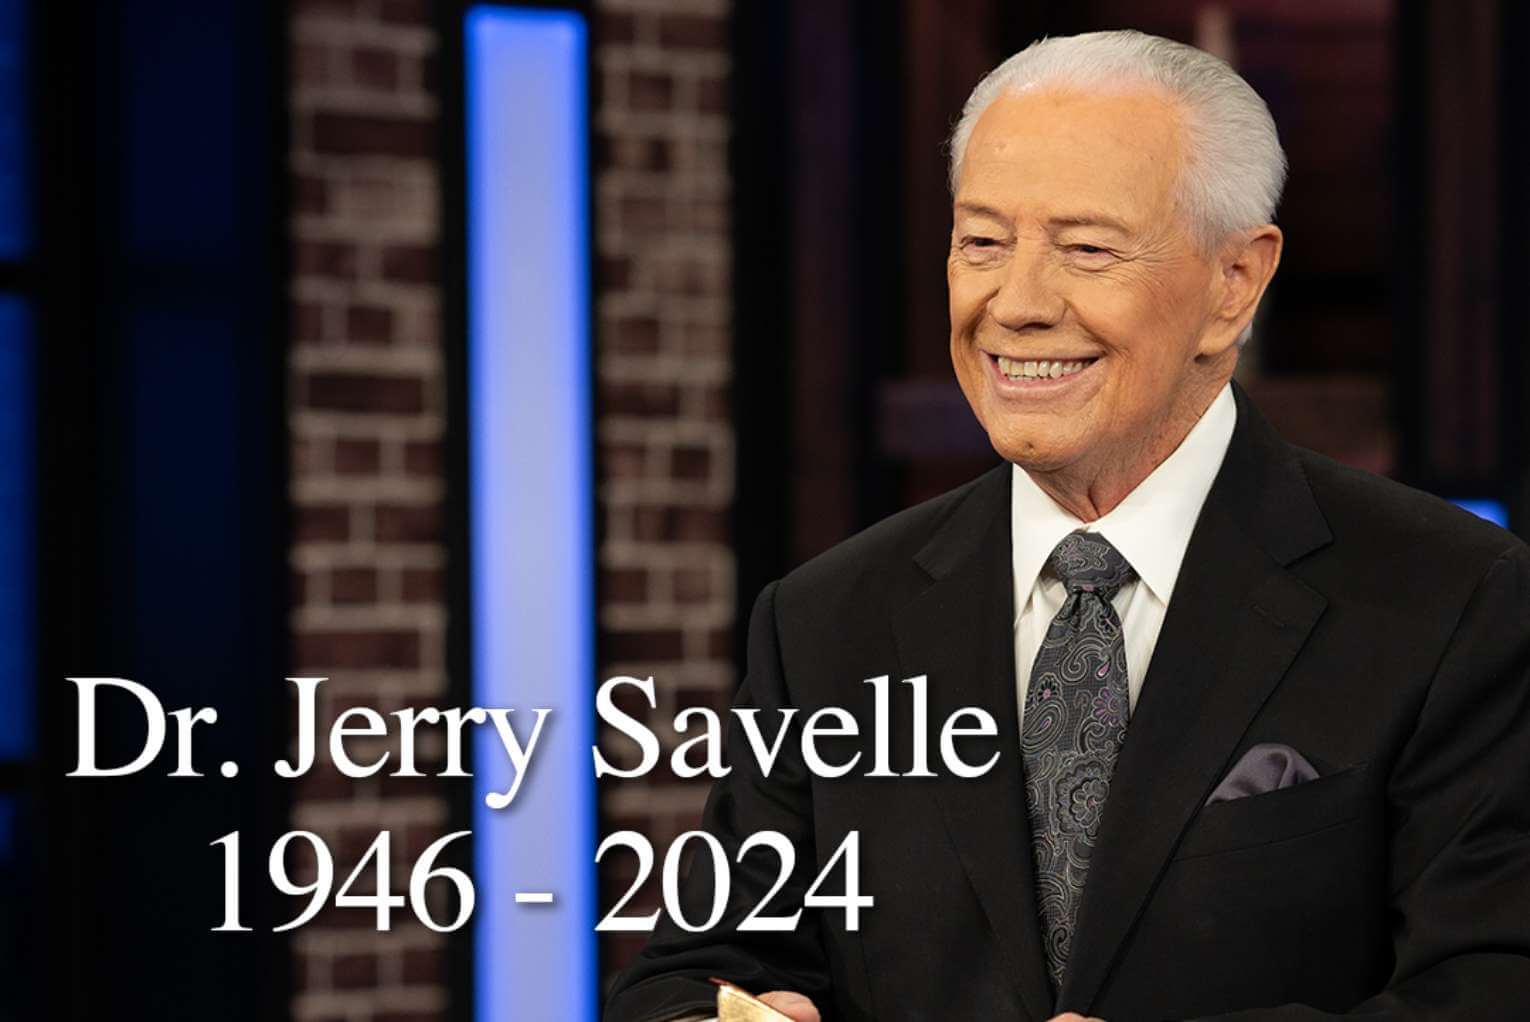 ‘A True General of the Lord’: Evangelist Jerry Savelle Dies at 76